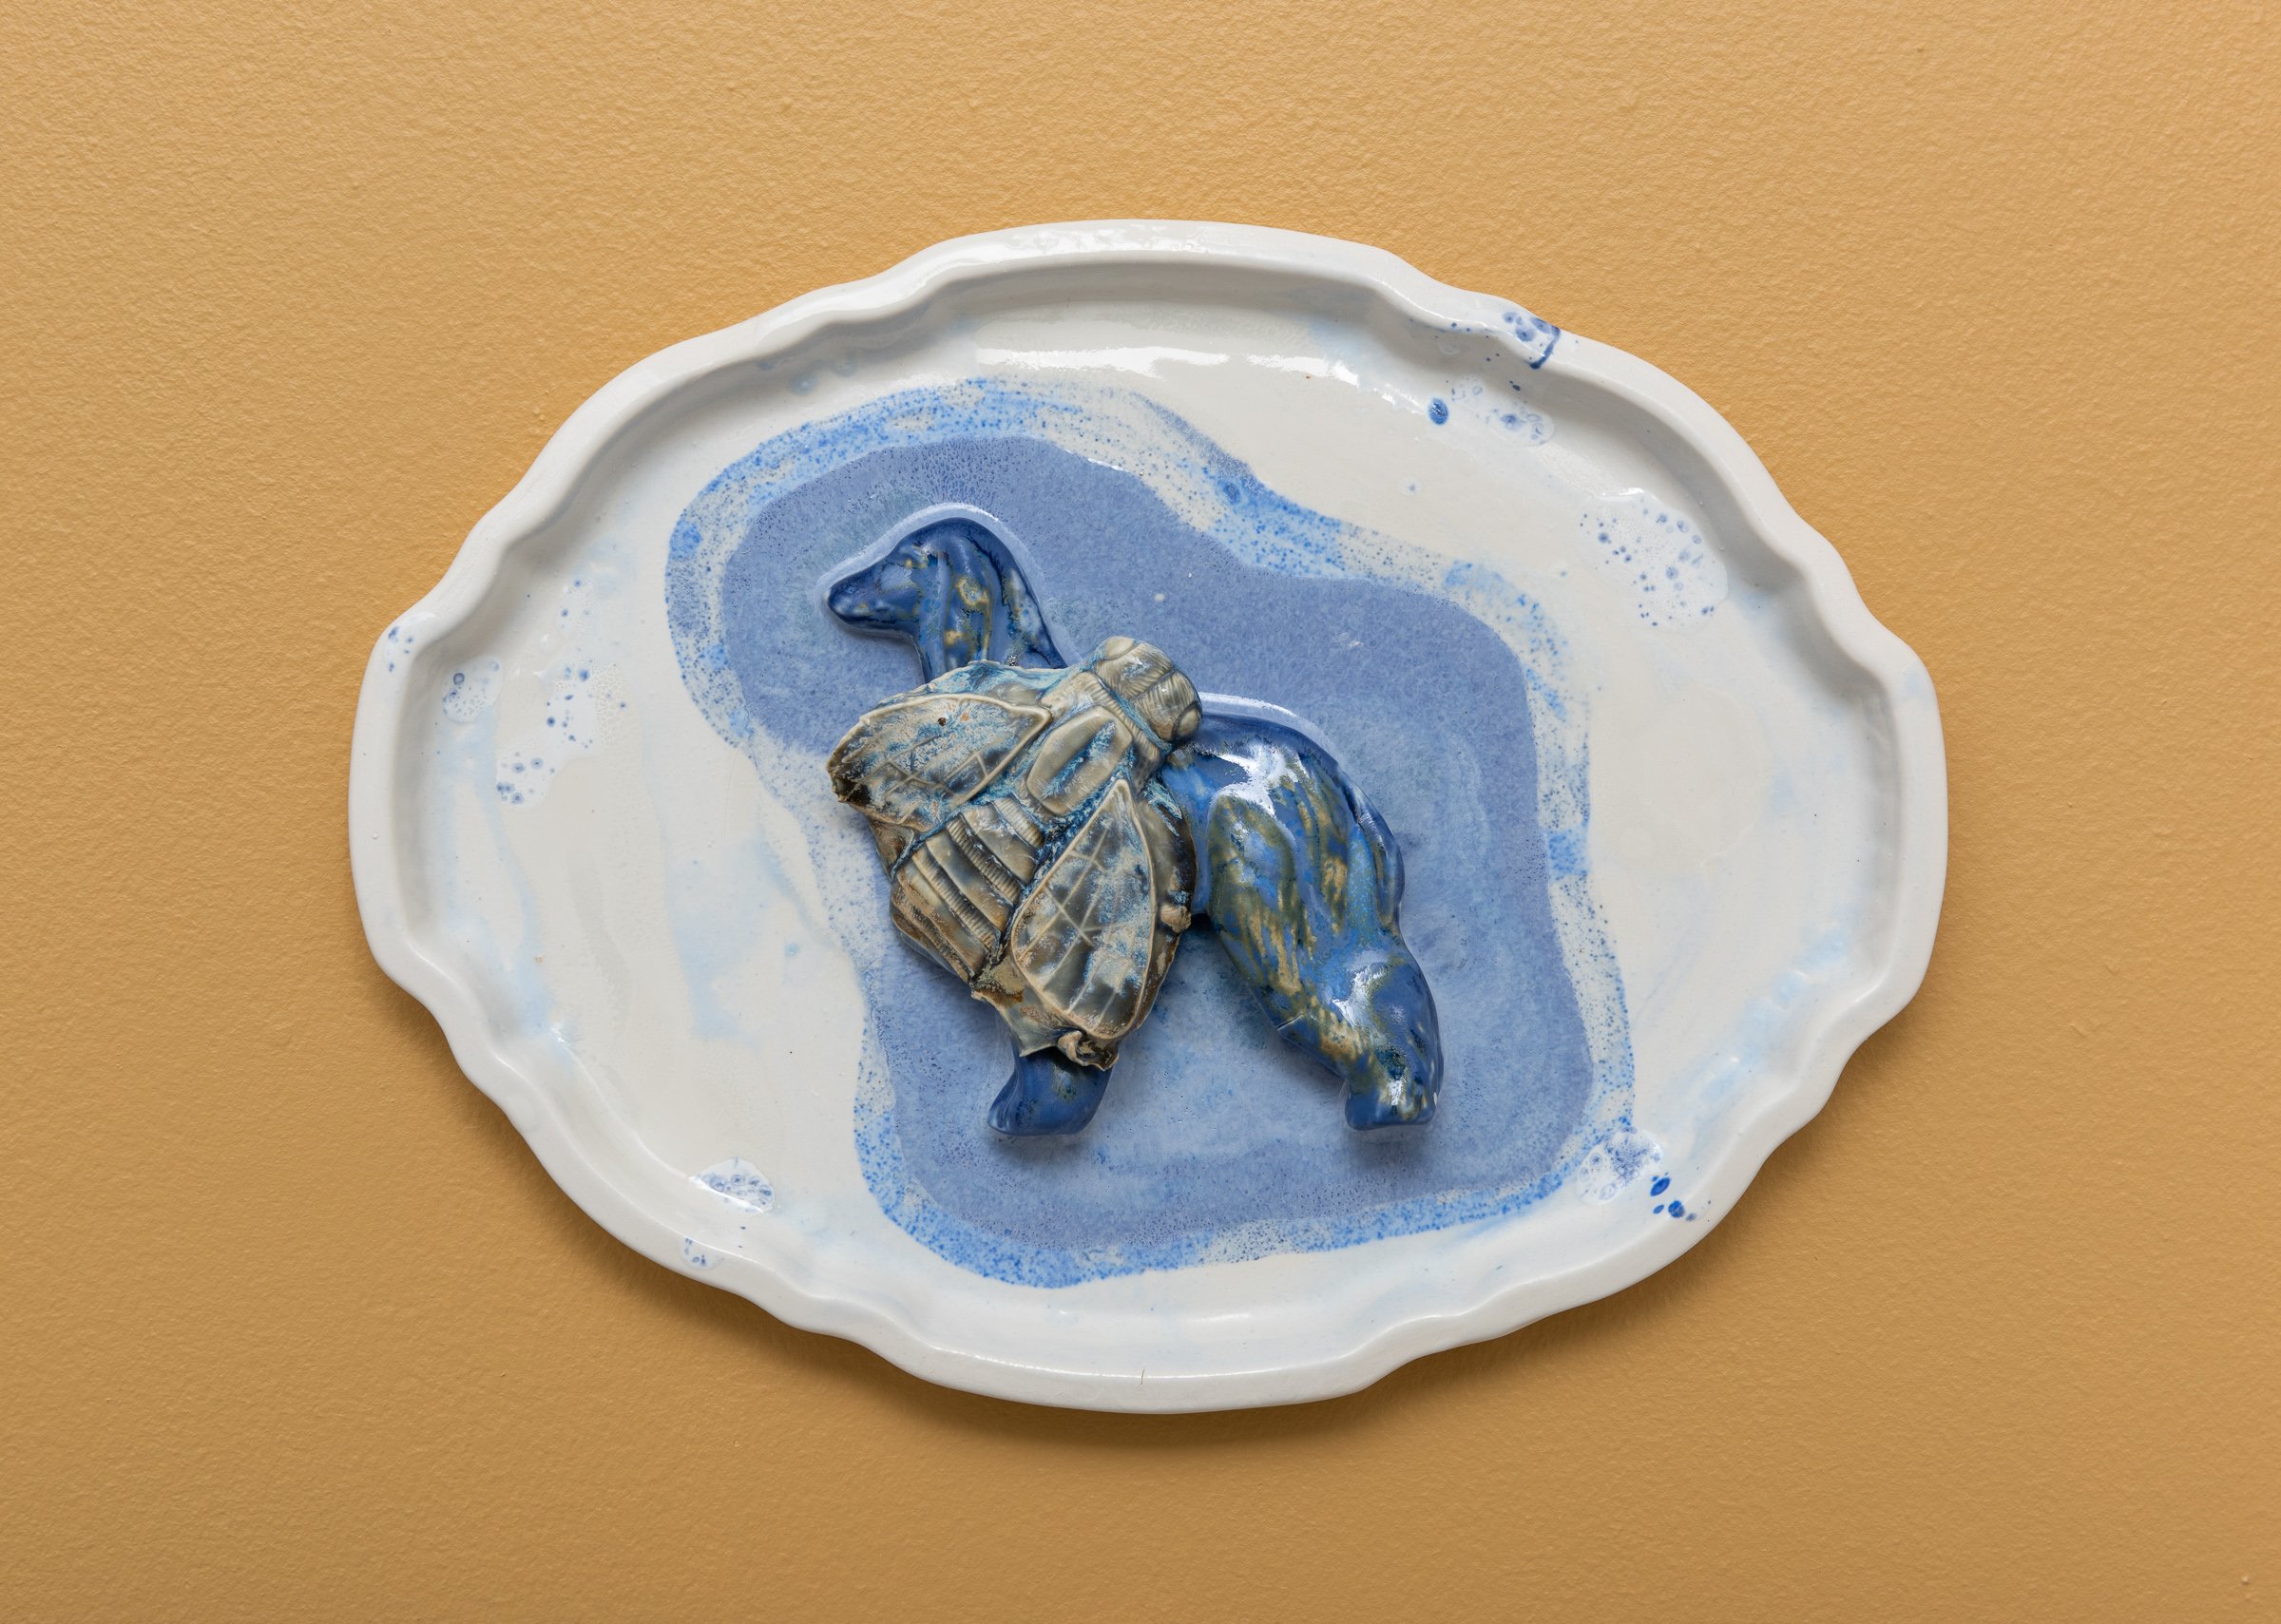  Why do Europeans put plates on their walls? I | 2022  Porcelain, glazes, porcelain decals and tissue paper, press molding. 39x30x5  Photo: Thomas Tveter 